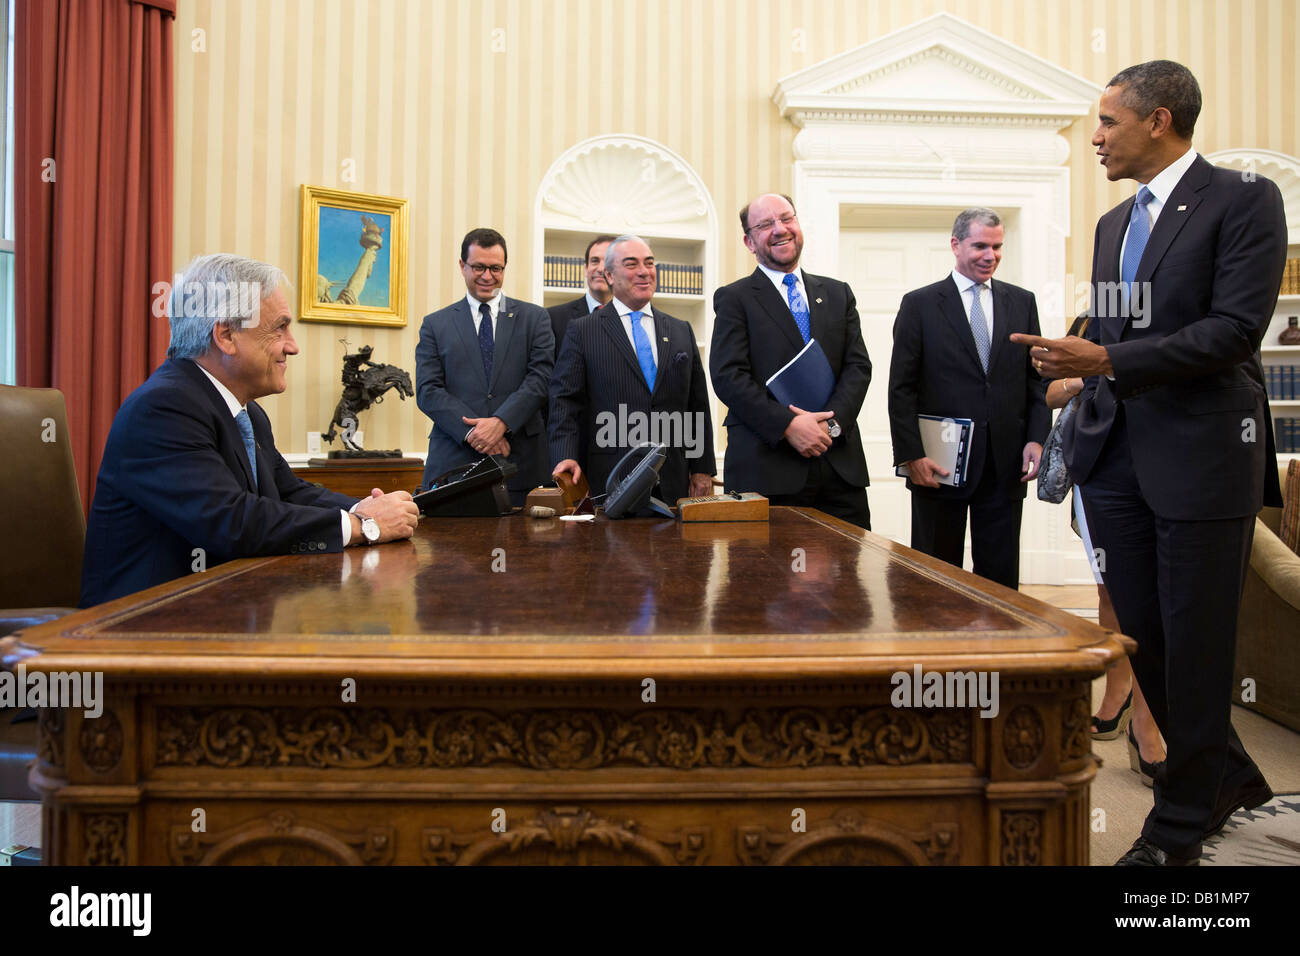 us-president-barack-obama-jokes-with-members-of-the-chilean-delegation-DB1MP7.jpg